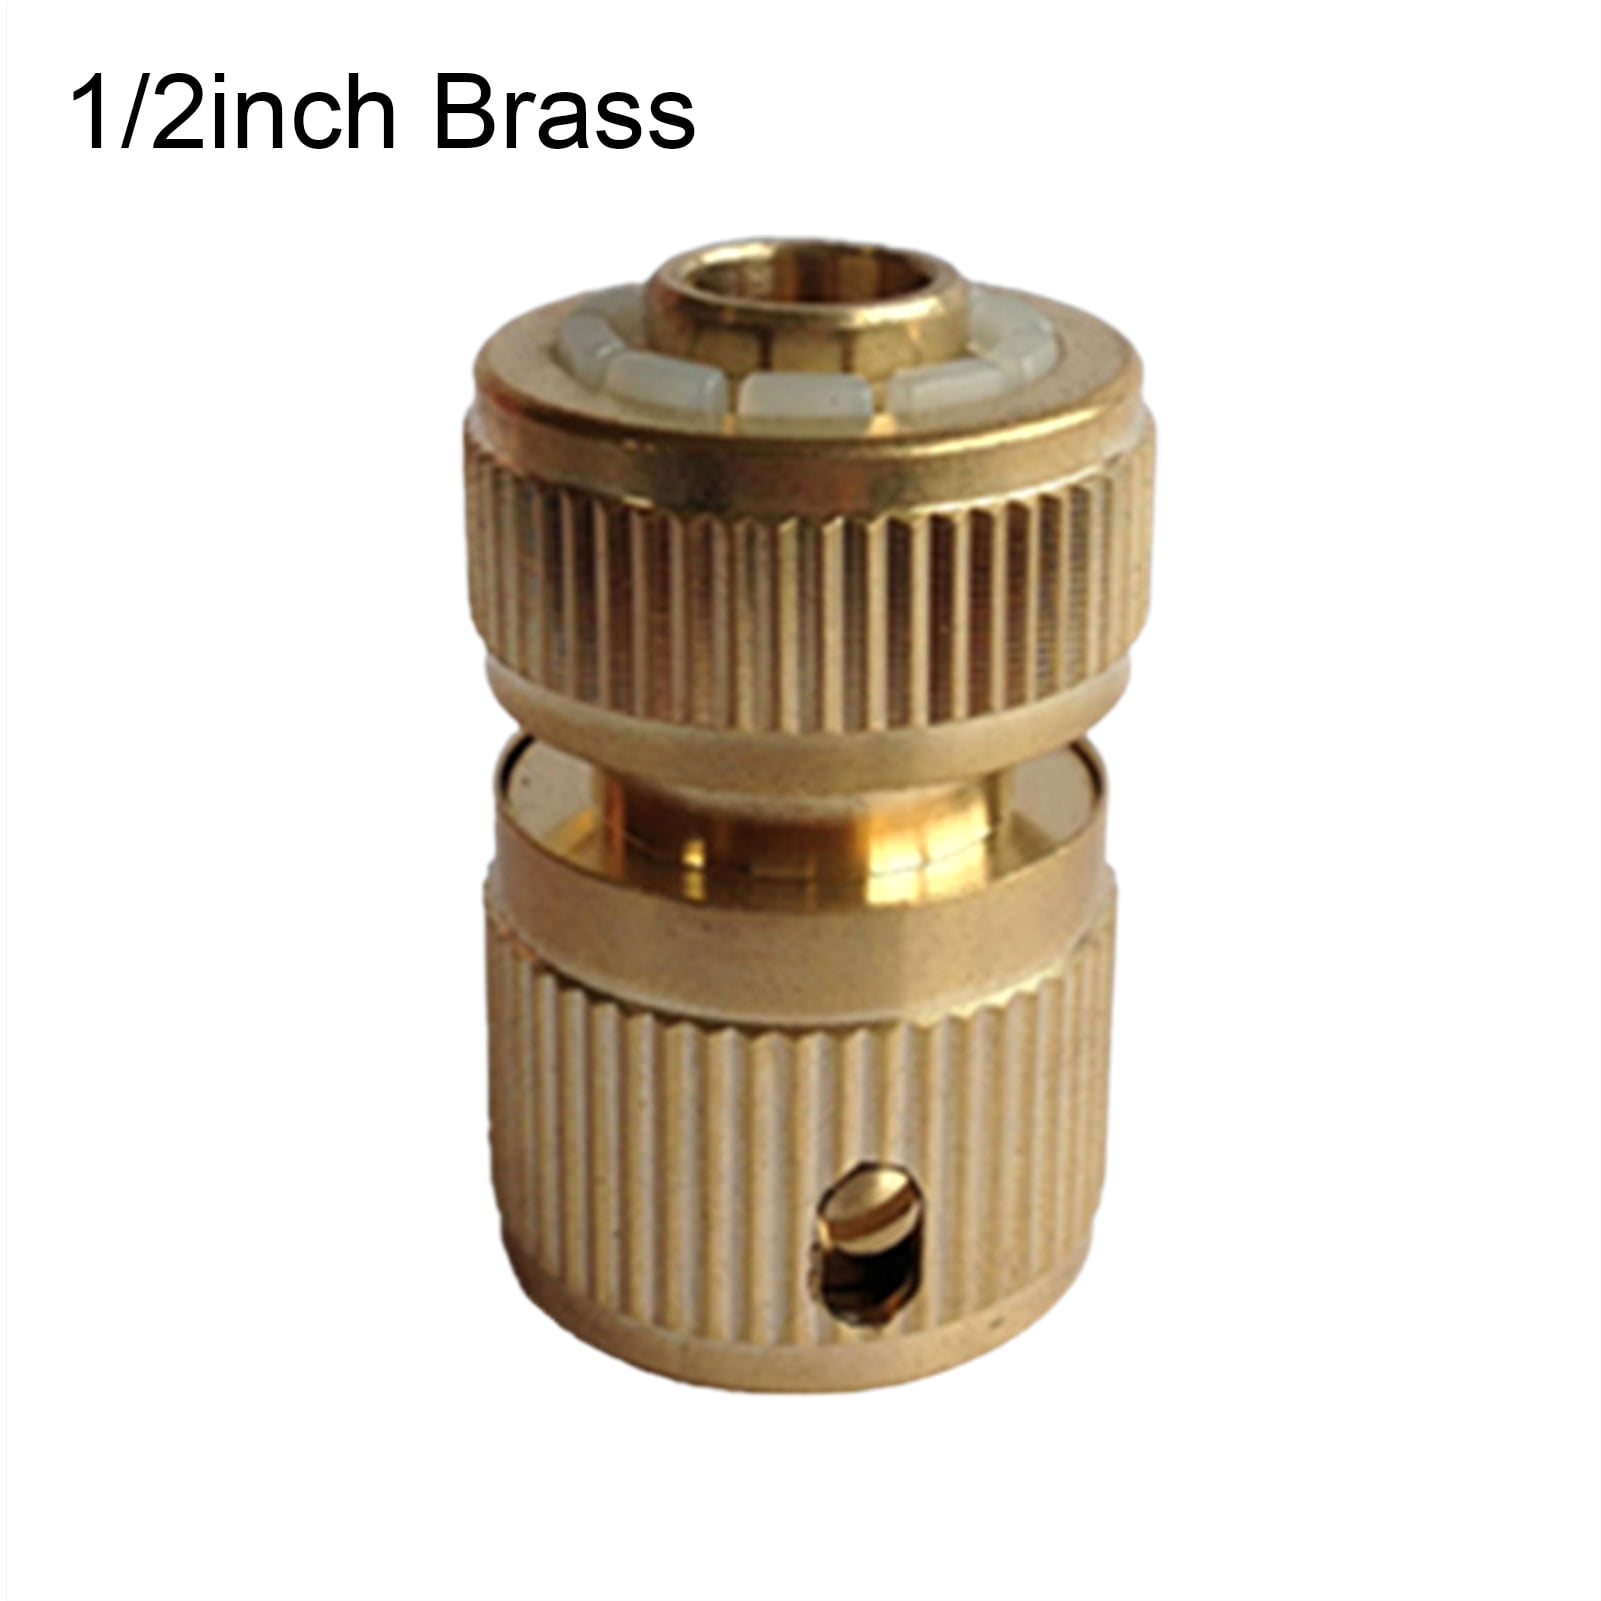 4pc Brass Garden Lawn Water Hose Pipe Fitting Connector Tap Set Sppray Nozzle 